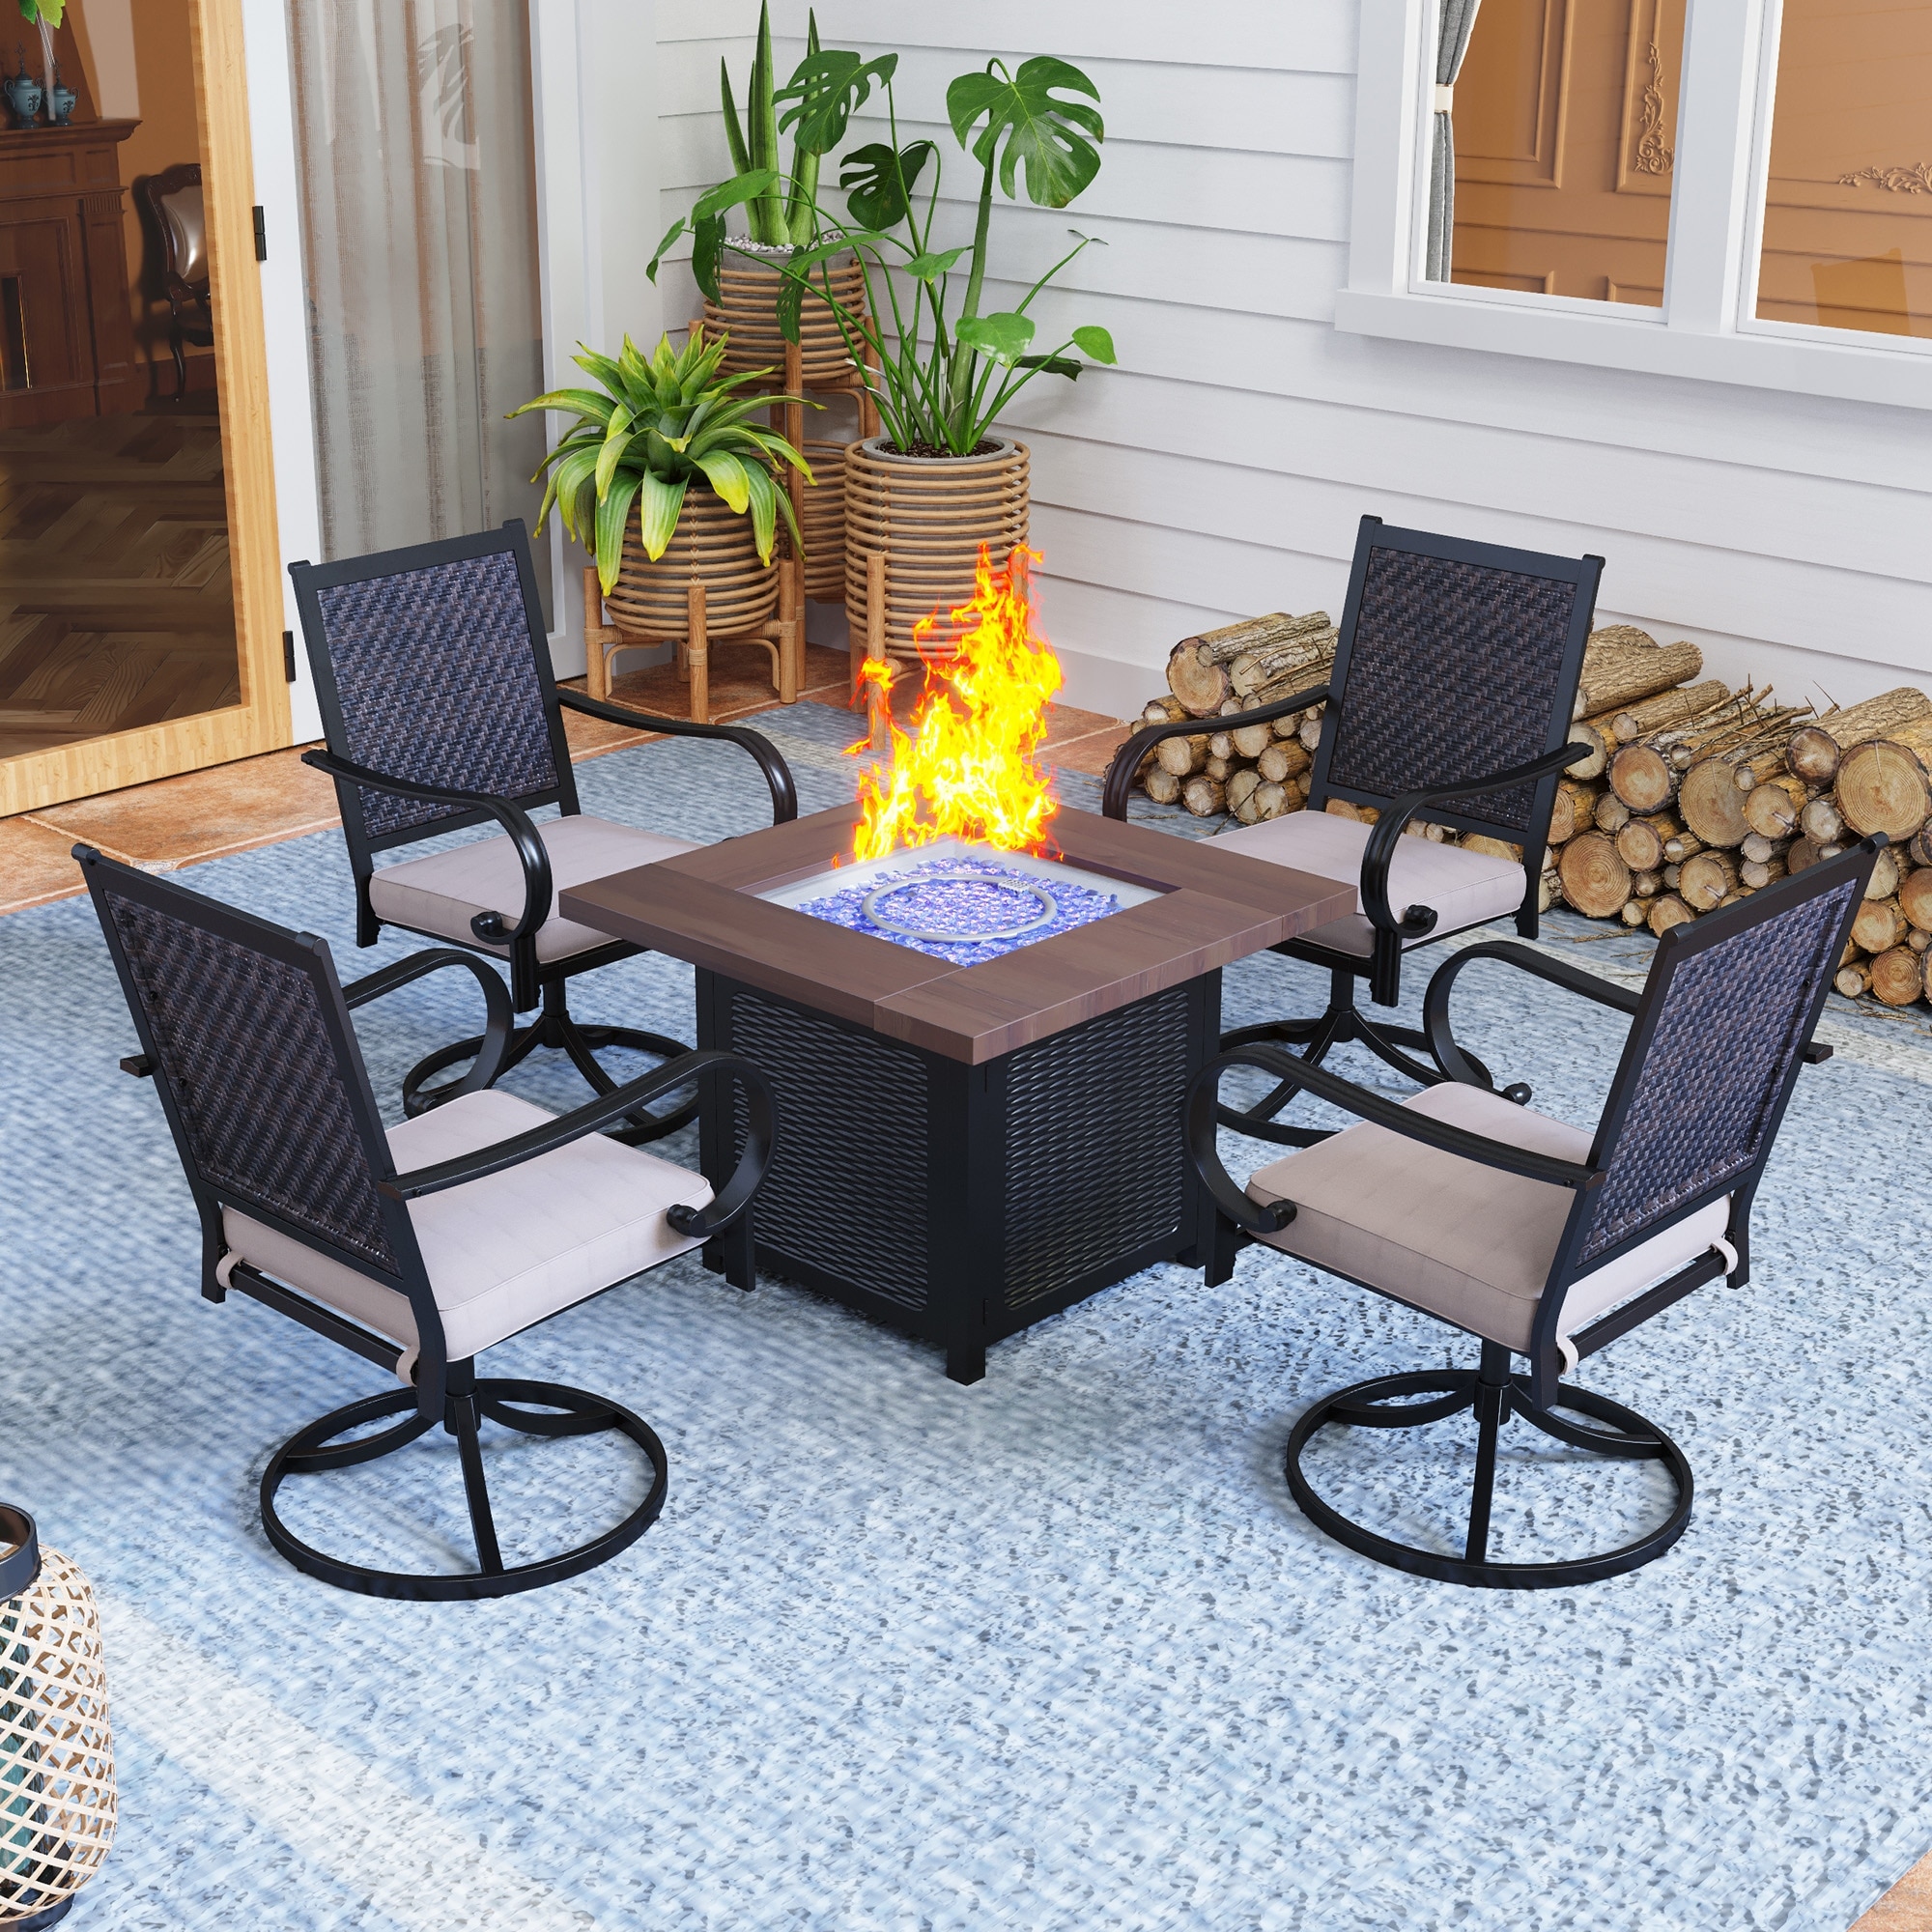 PATIO TIME 5-Piece Gas Fire Pit Table Outdoor Dining Set Rattan Swivel Chairs With Cushion and Wood-look Square Gas Fire Pit Table